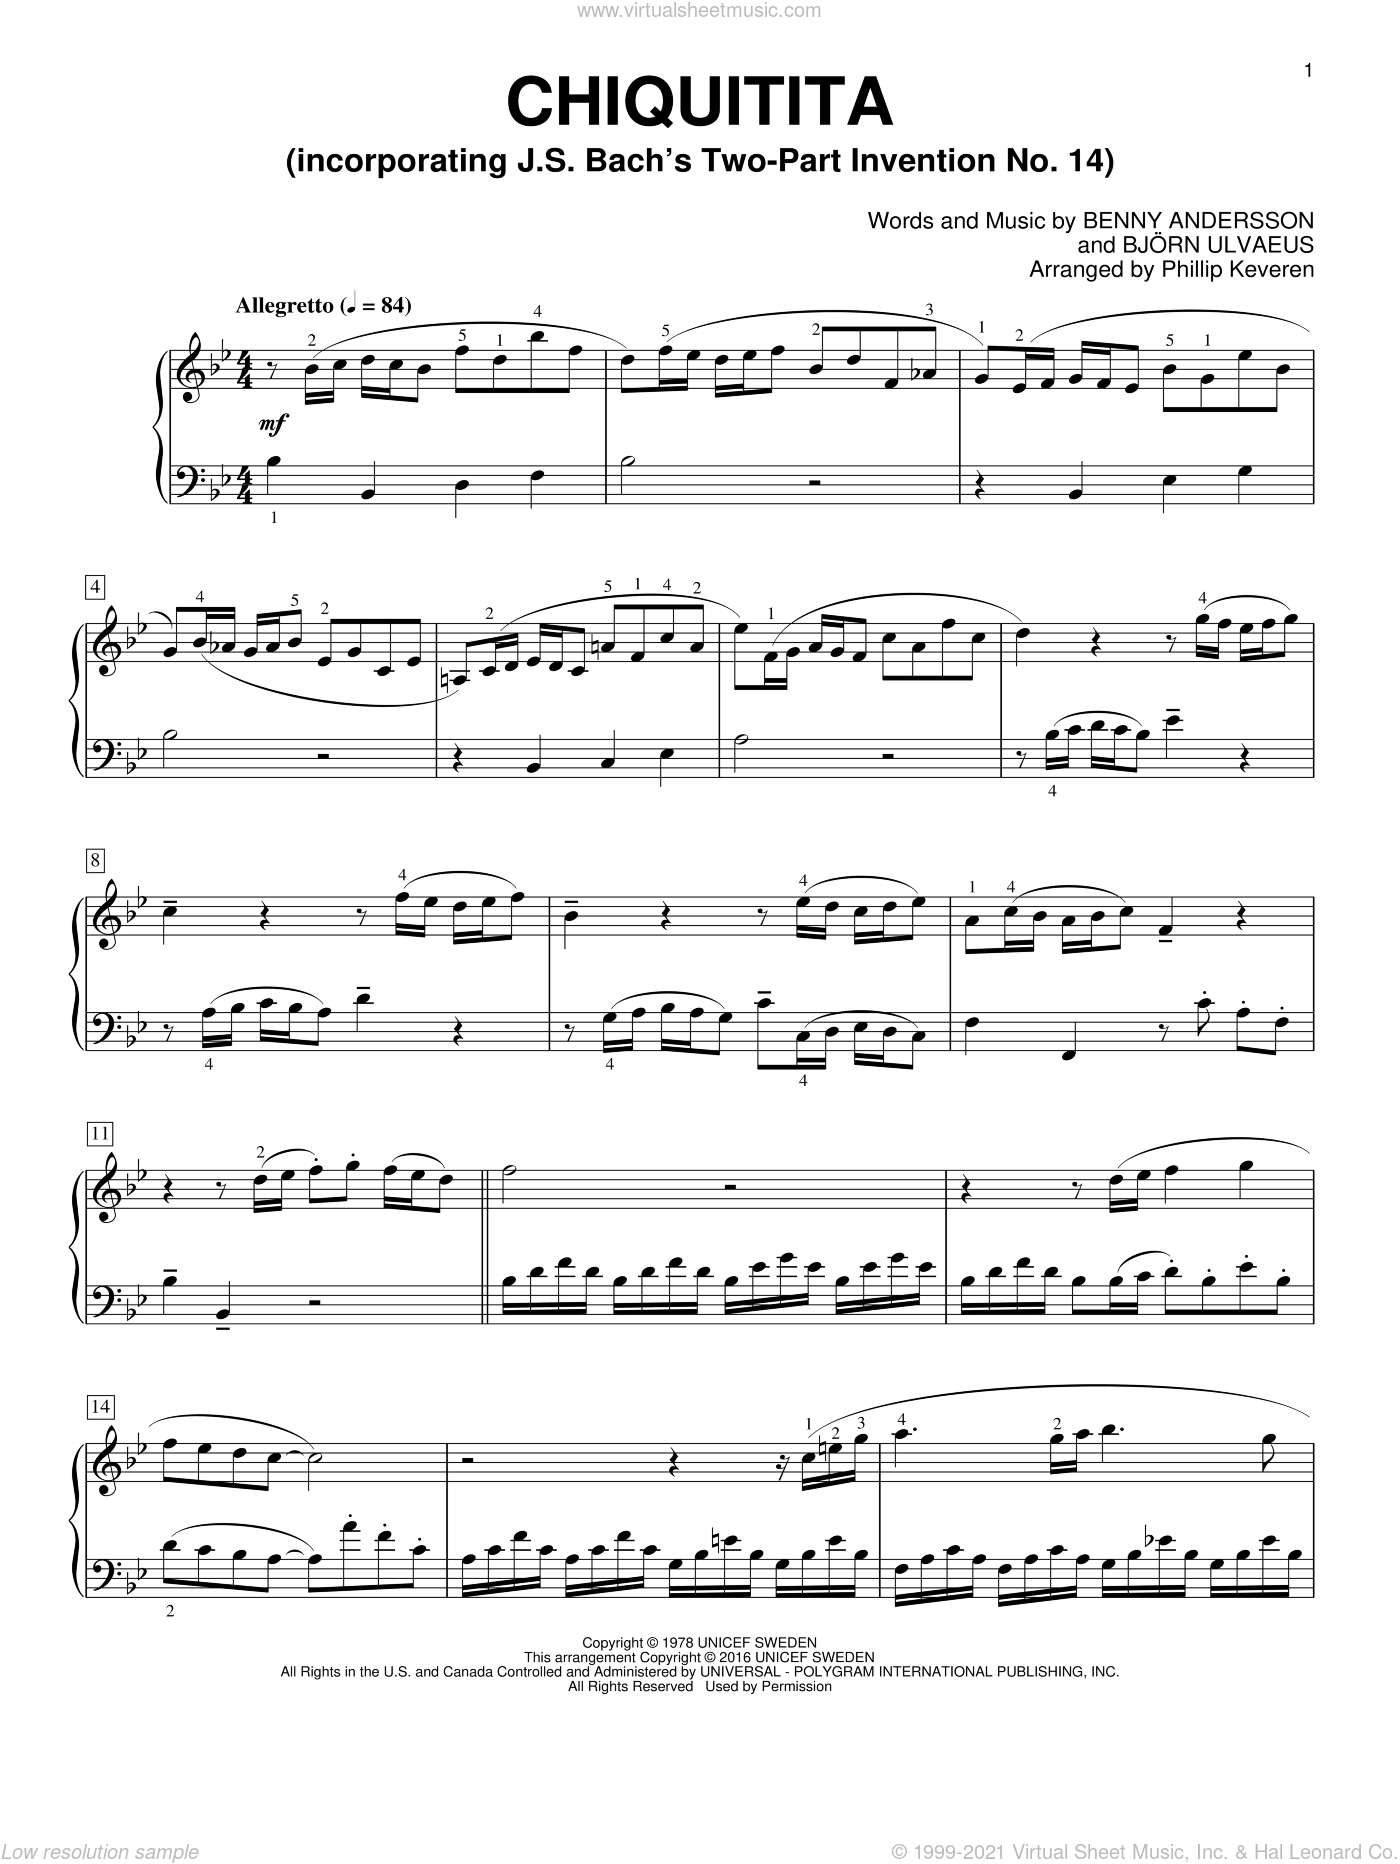 Andersson Chiquitita Sheet Music For Piano Solo Pdf Chiquitita tell me what's wrong. andersson chiquitita sheet music for piano solo pdf